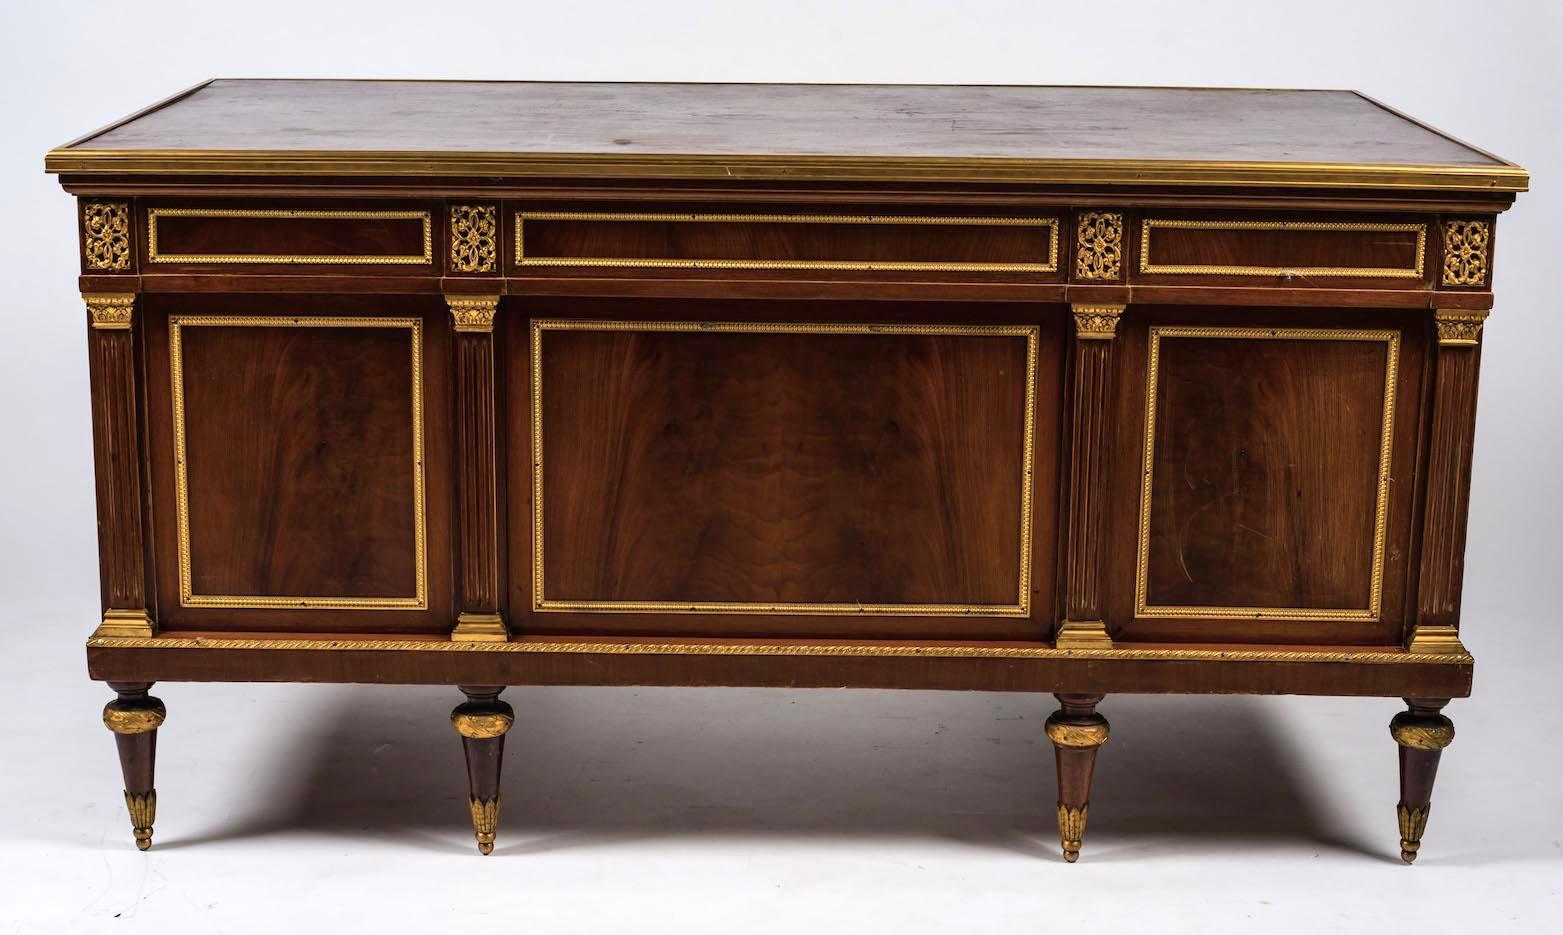 A fine French 19th century mahogany pedestal desk mounts with gilded bronze. Both sides of the desk have small brass knobs that allow wings to be pulled out to extend the writing surface.
Measures: cm 79 x 151 x 82.